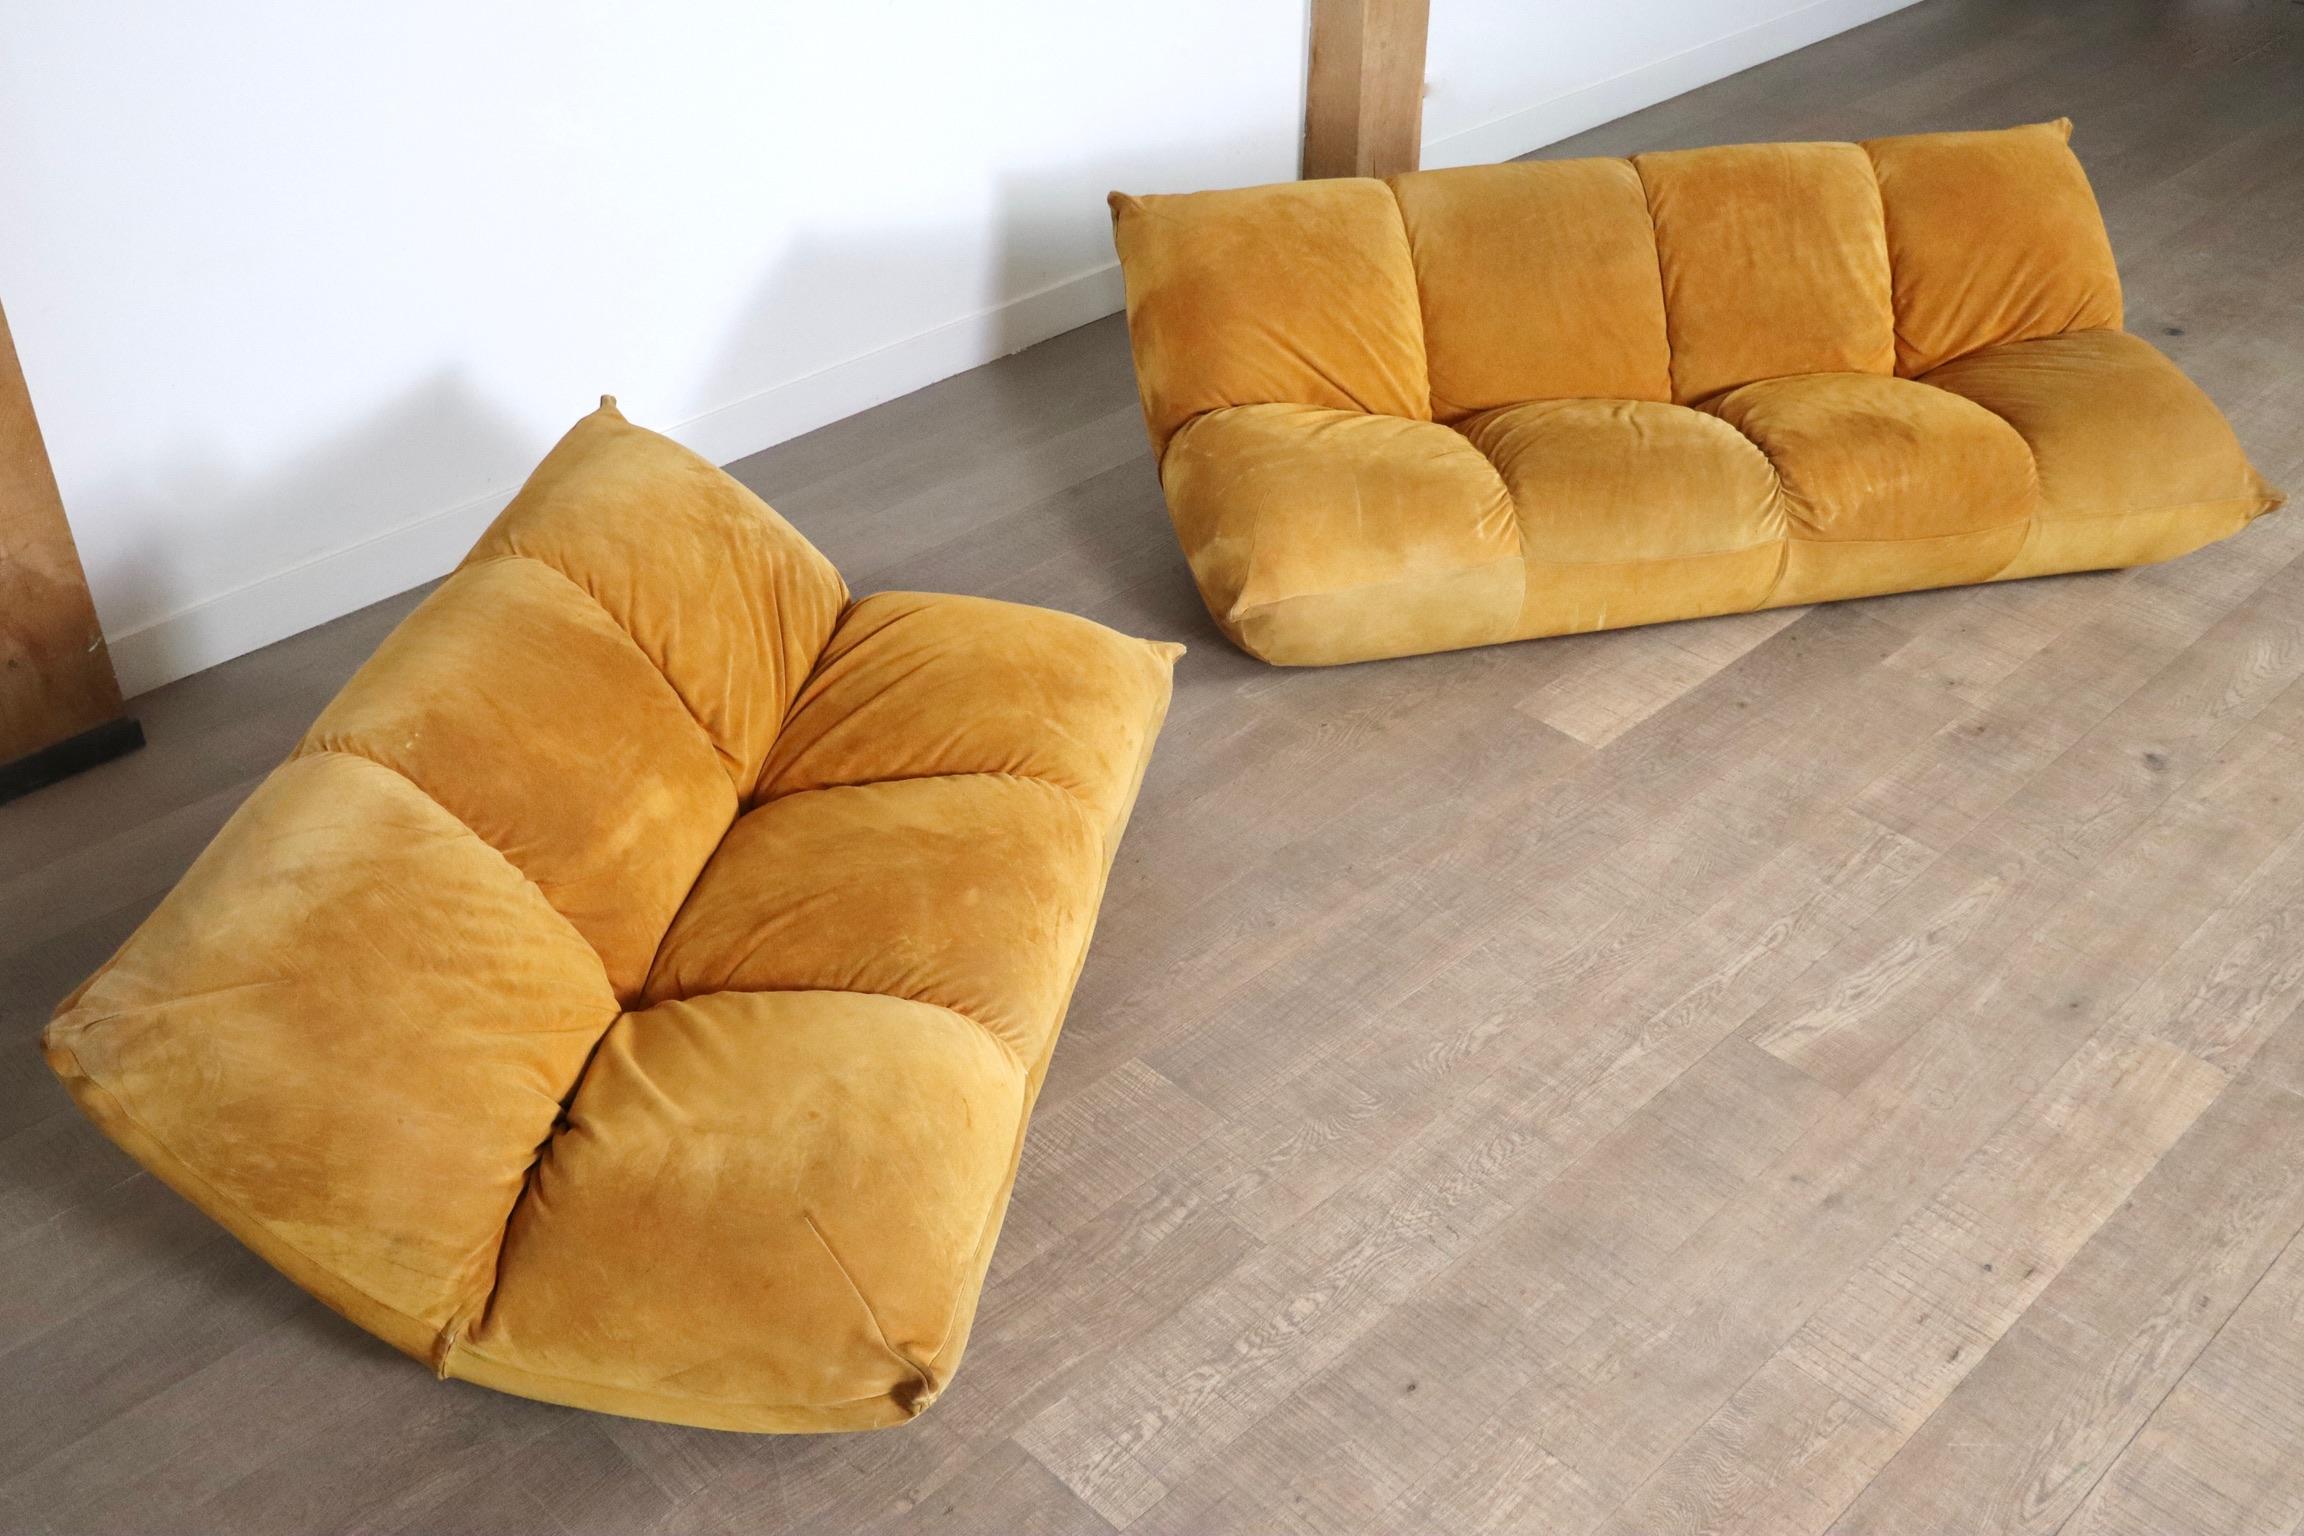 Great pair of Papillon sofas designed by Guido Rosati for Giovannetti Collezioni, 1970s.

This particular set comes in its original mustard suede, giving this nice design even more character.
These rare sofas have a fun design, where you can have a